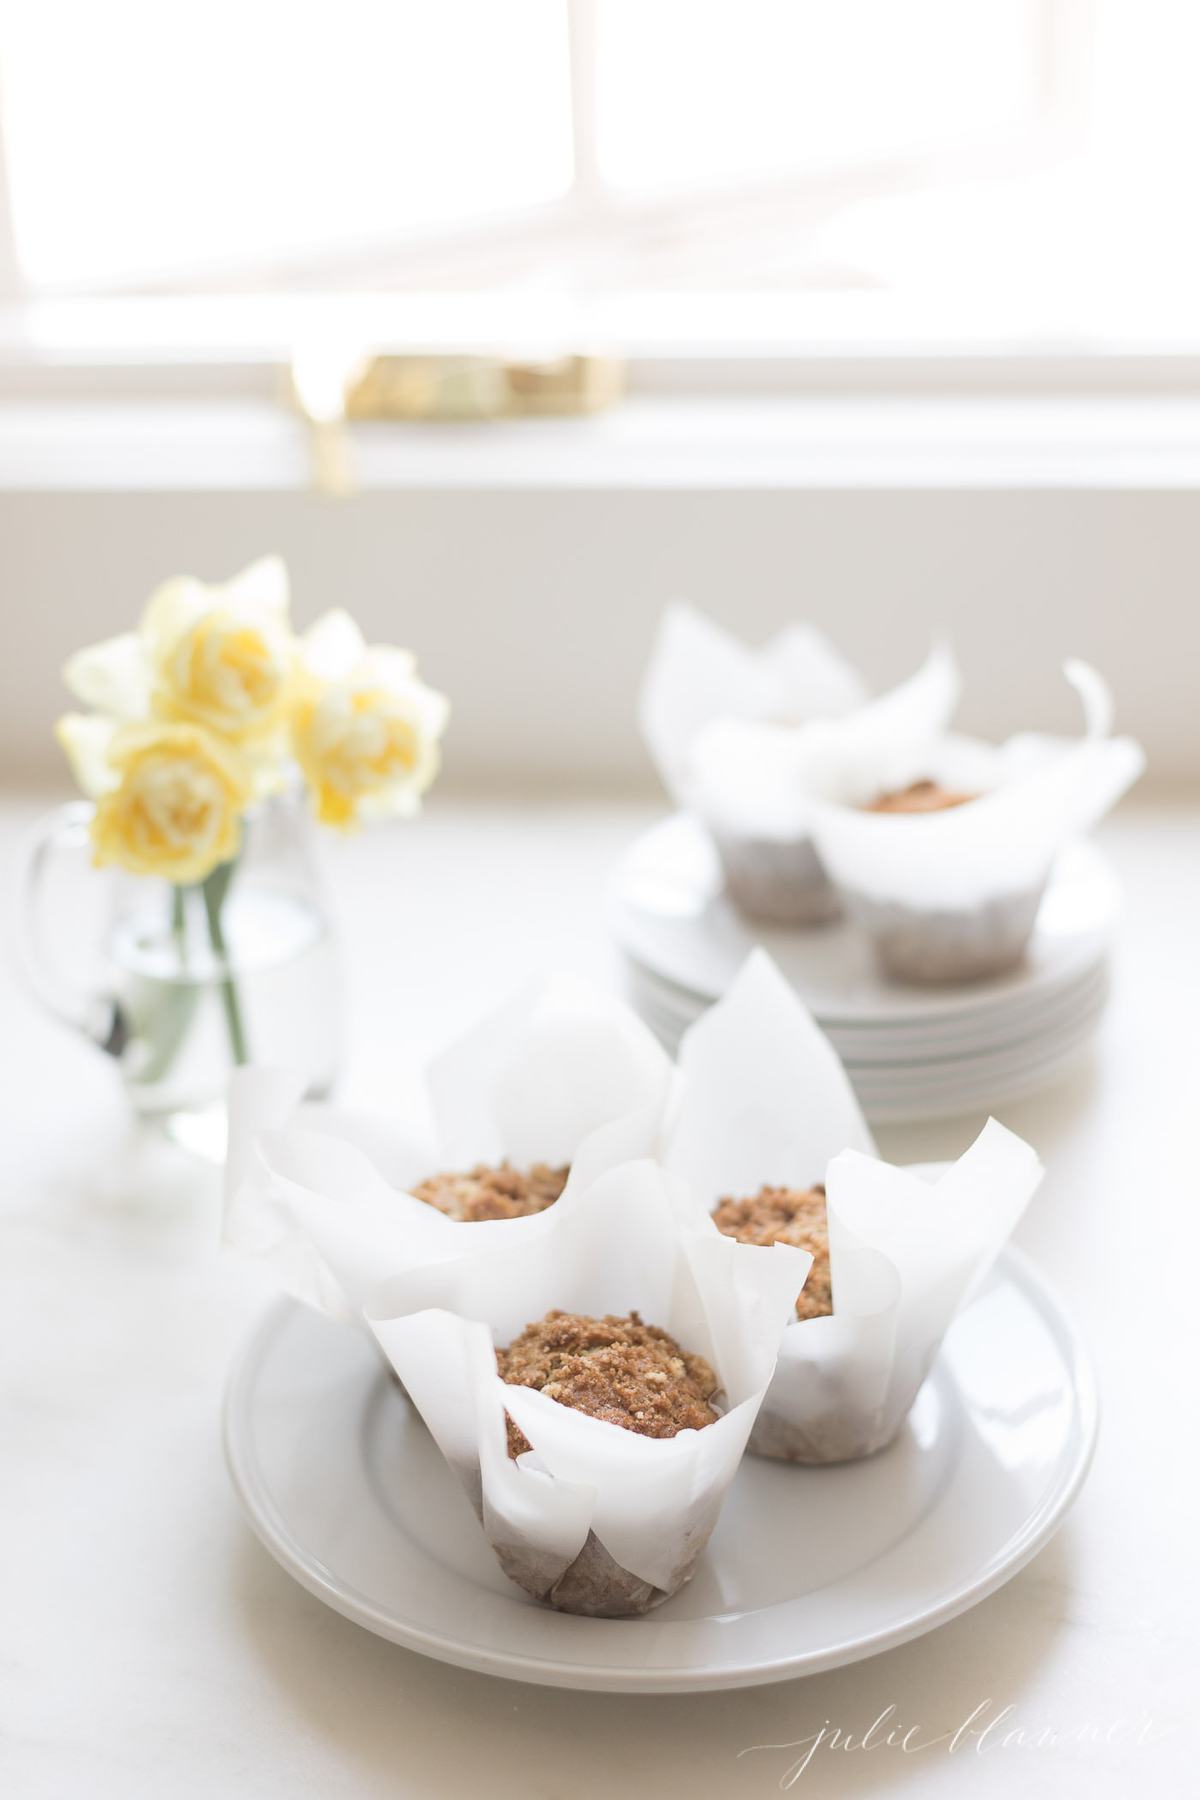 banana muffins in paper wrappers on a white plate